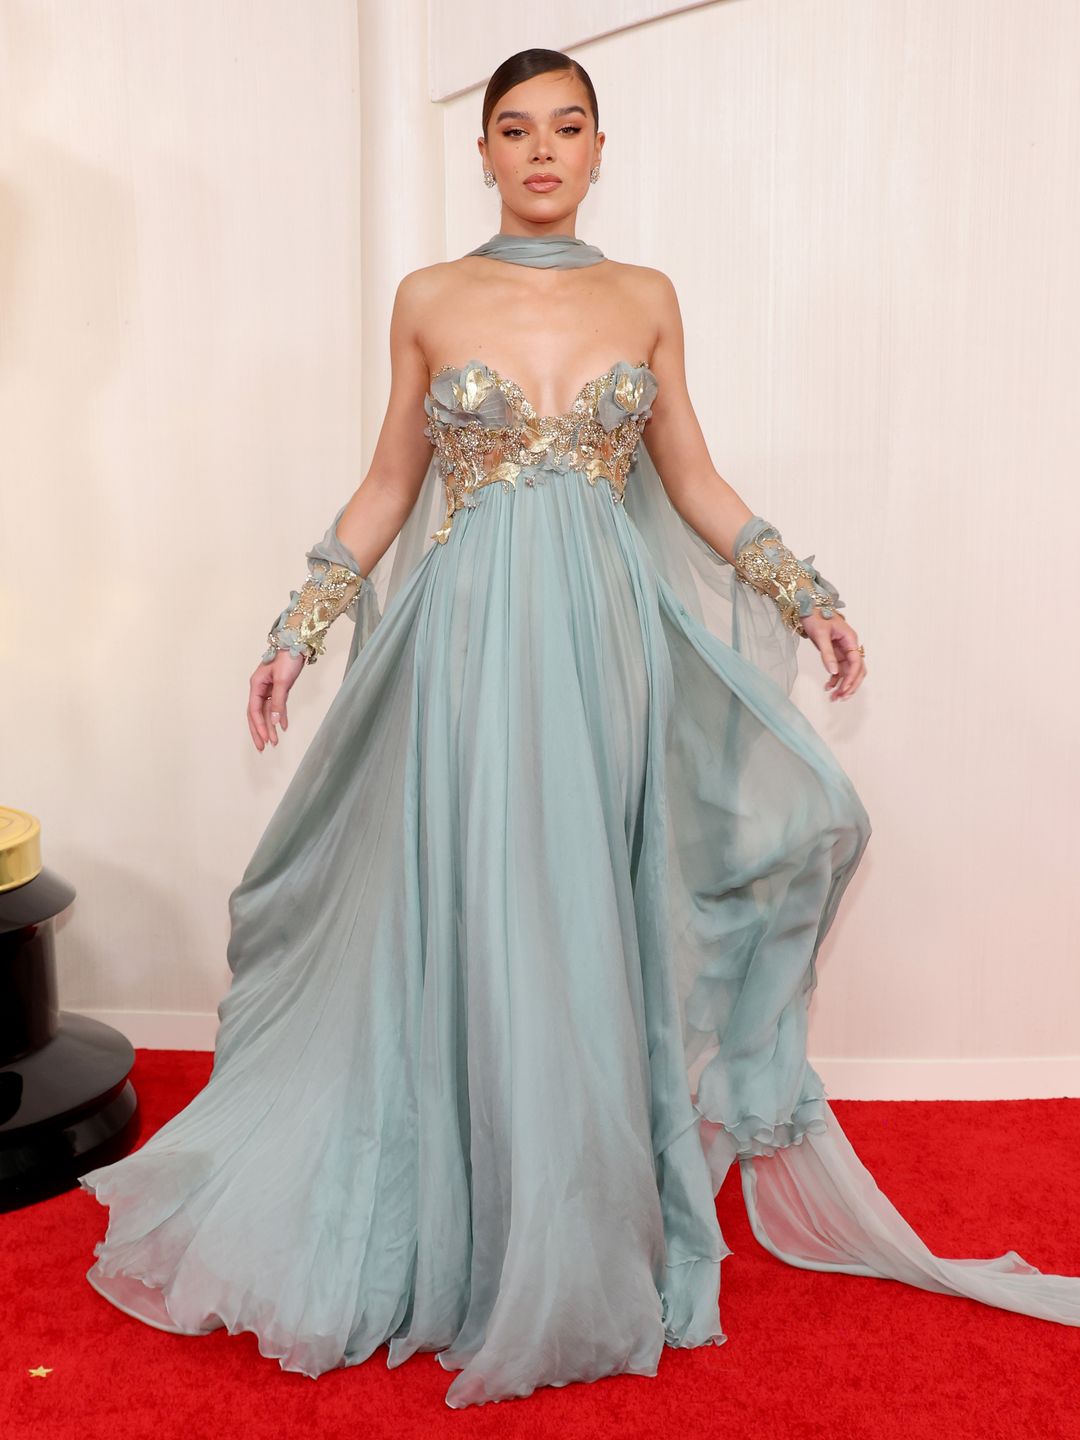 Hailee Steinfeld attends the 96th Annual Academy Awards in a chiffon gown